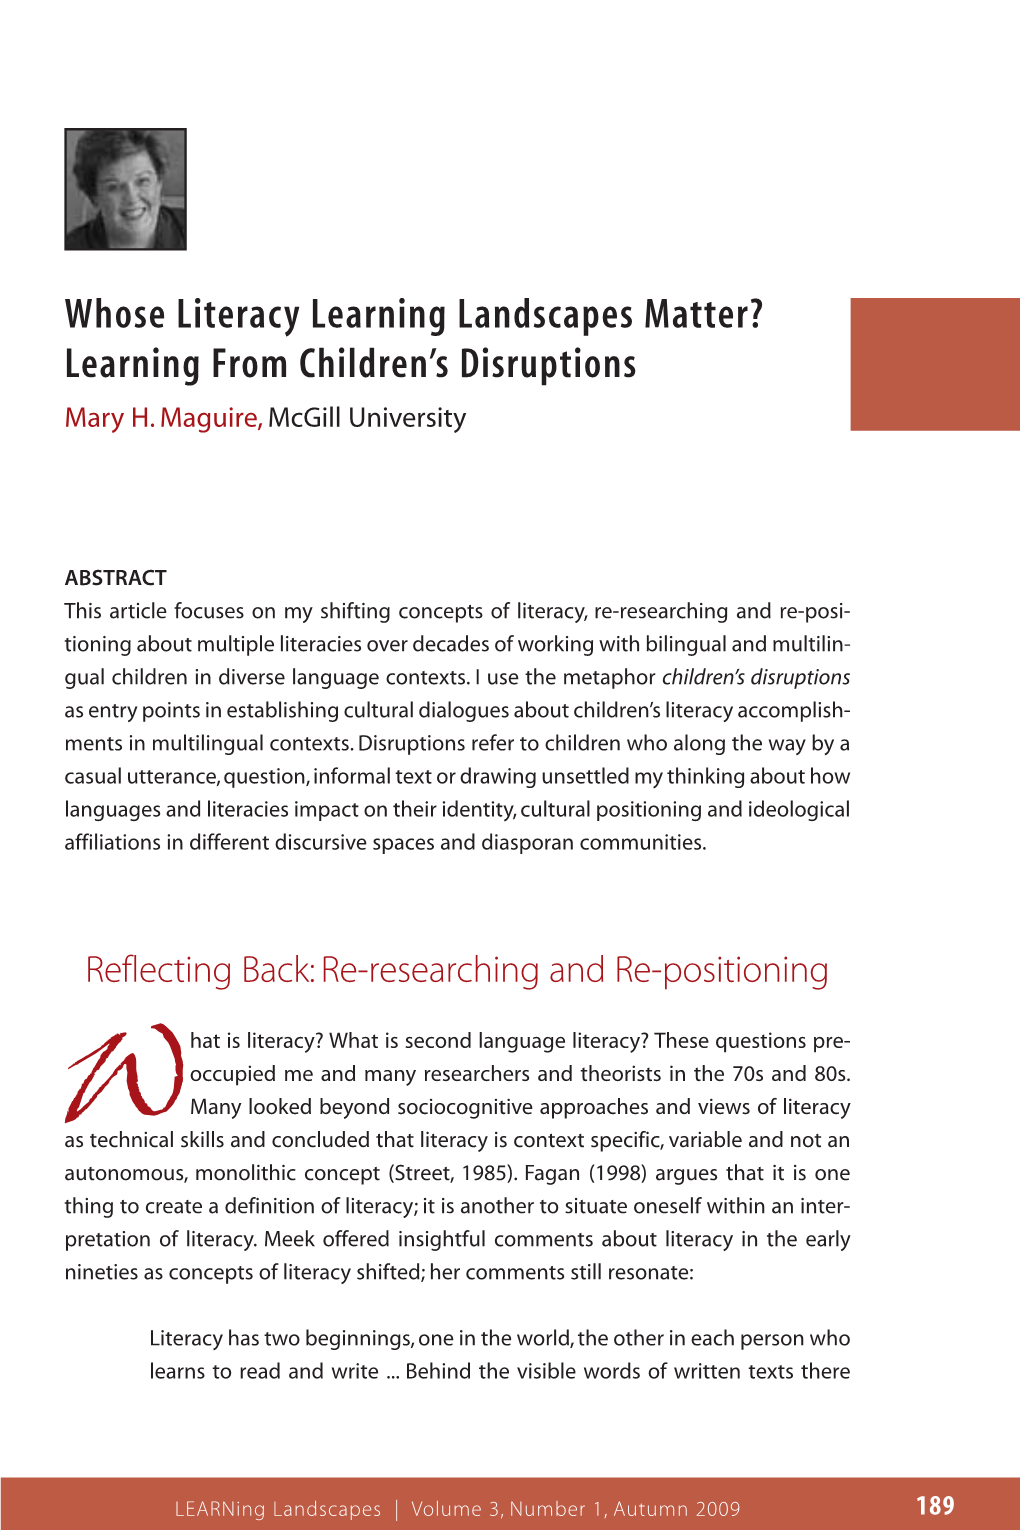 Whose Literacy Learning Landscapes Matter? Learning from Children's